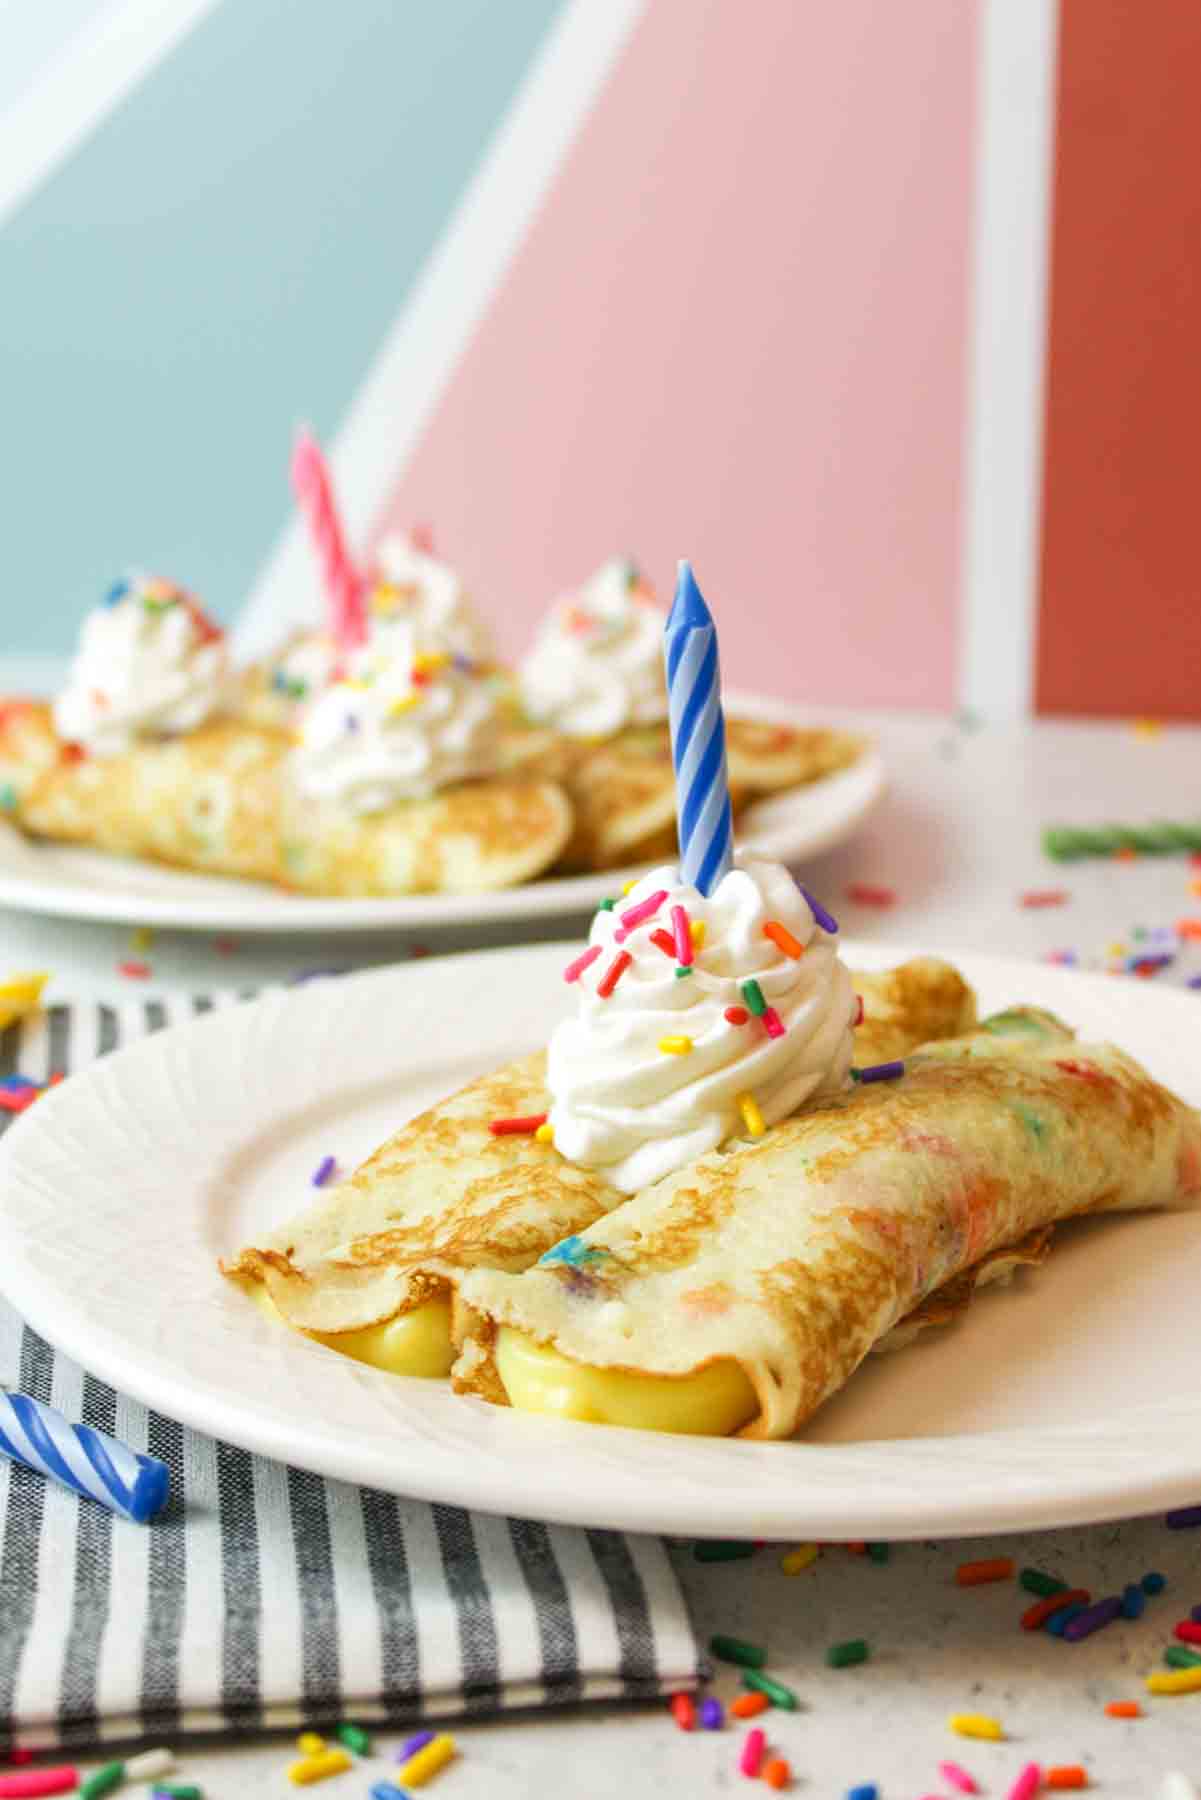 birthday cake crepes with whipped cream, sprinkles, and candles served on white plates.